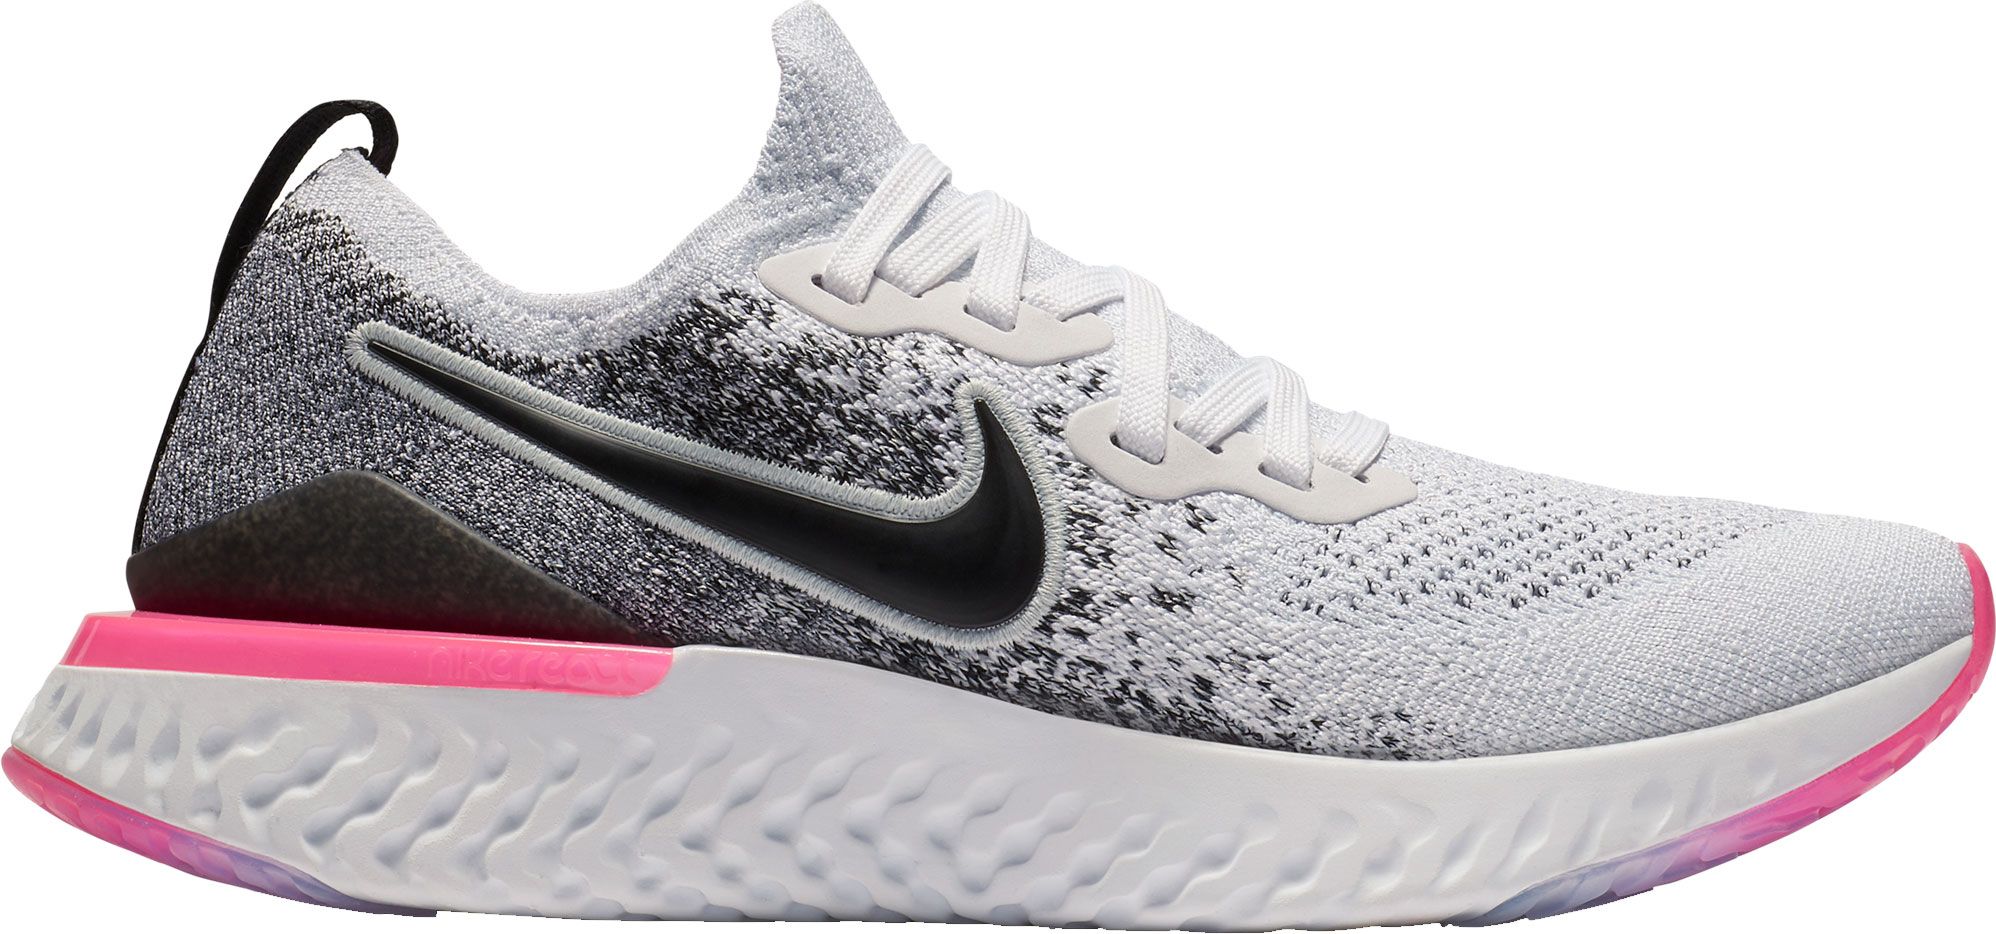 nike epic react flyknit 2 trainers ladies